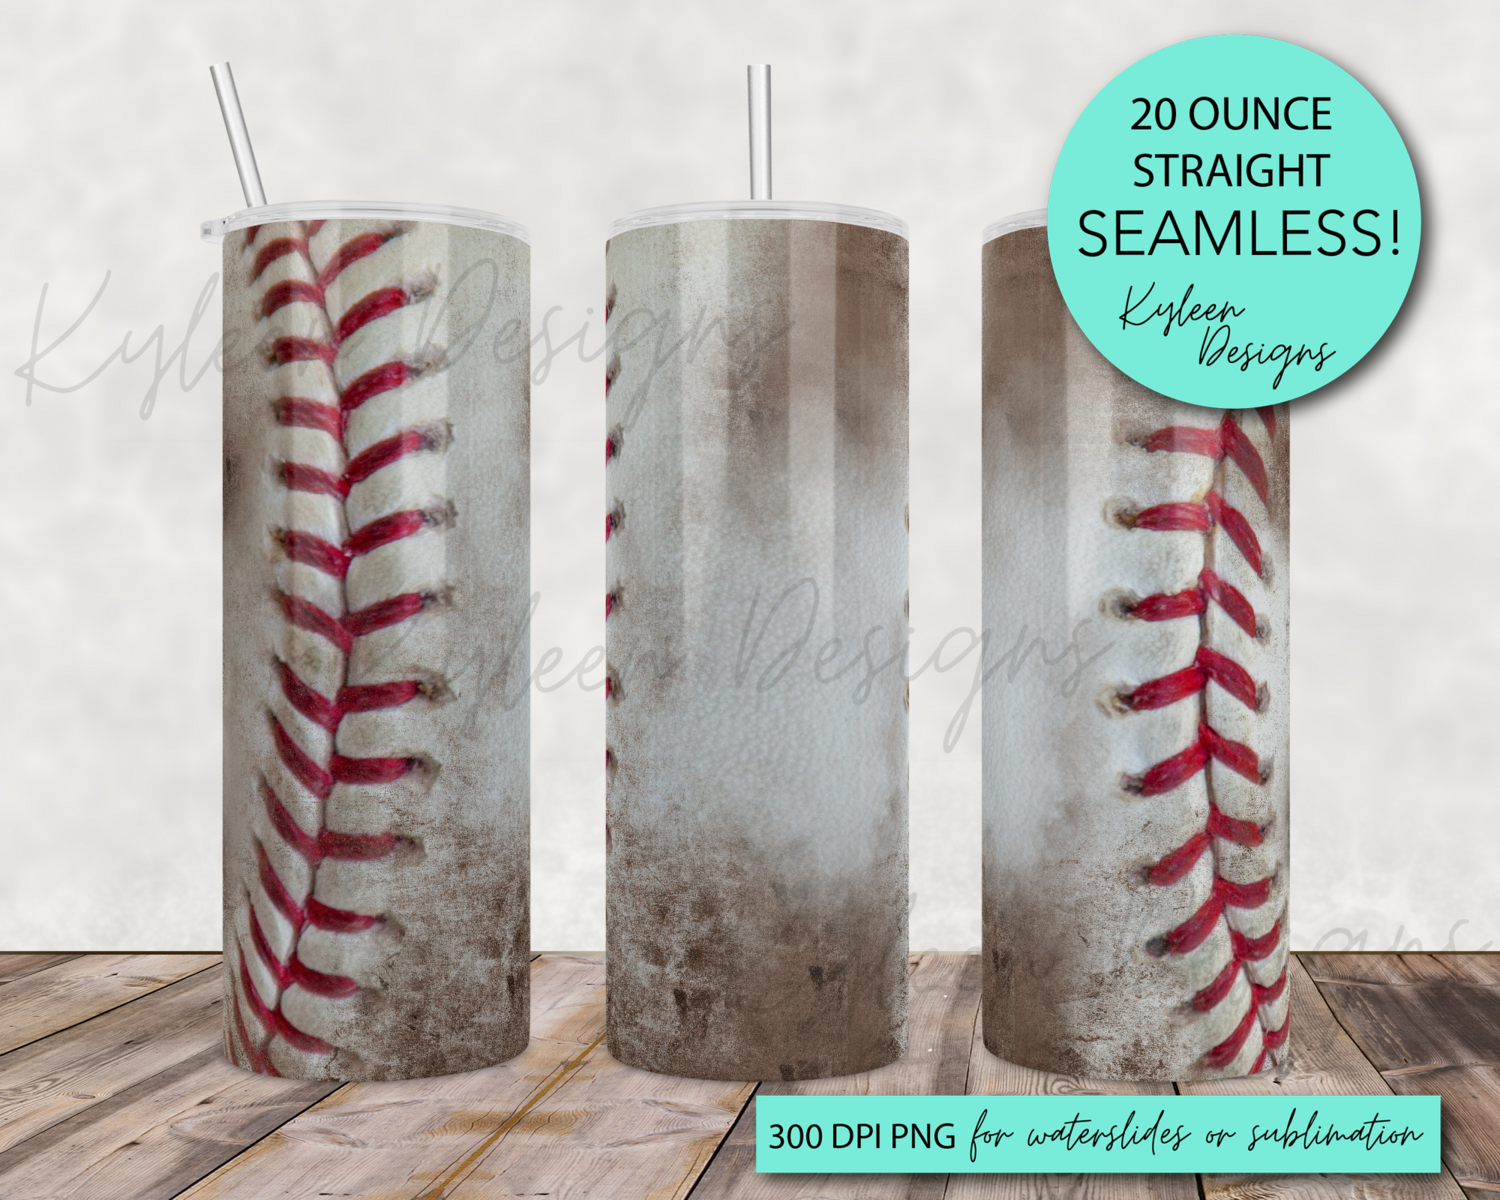 20 ounce add your own verbiage baseball wrap for sublimation, waterslide High res PNG digital file